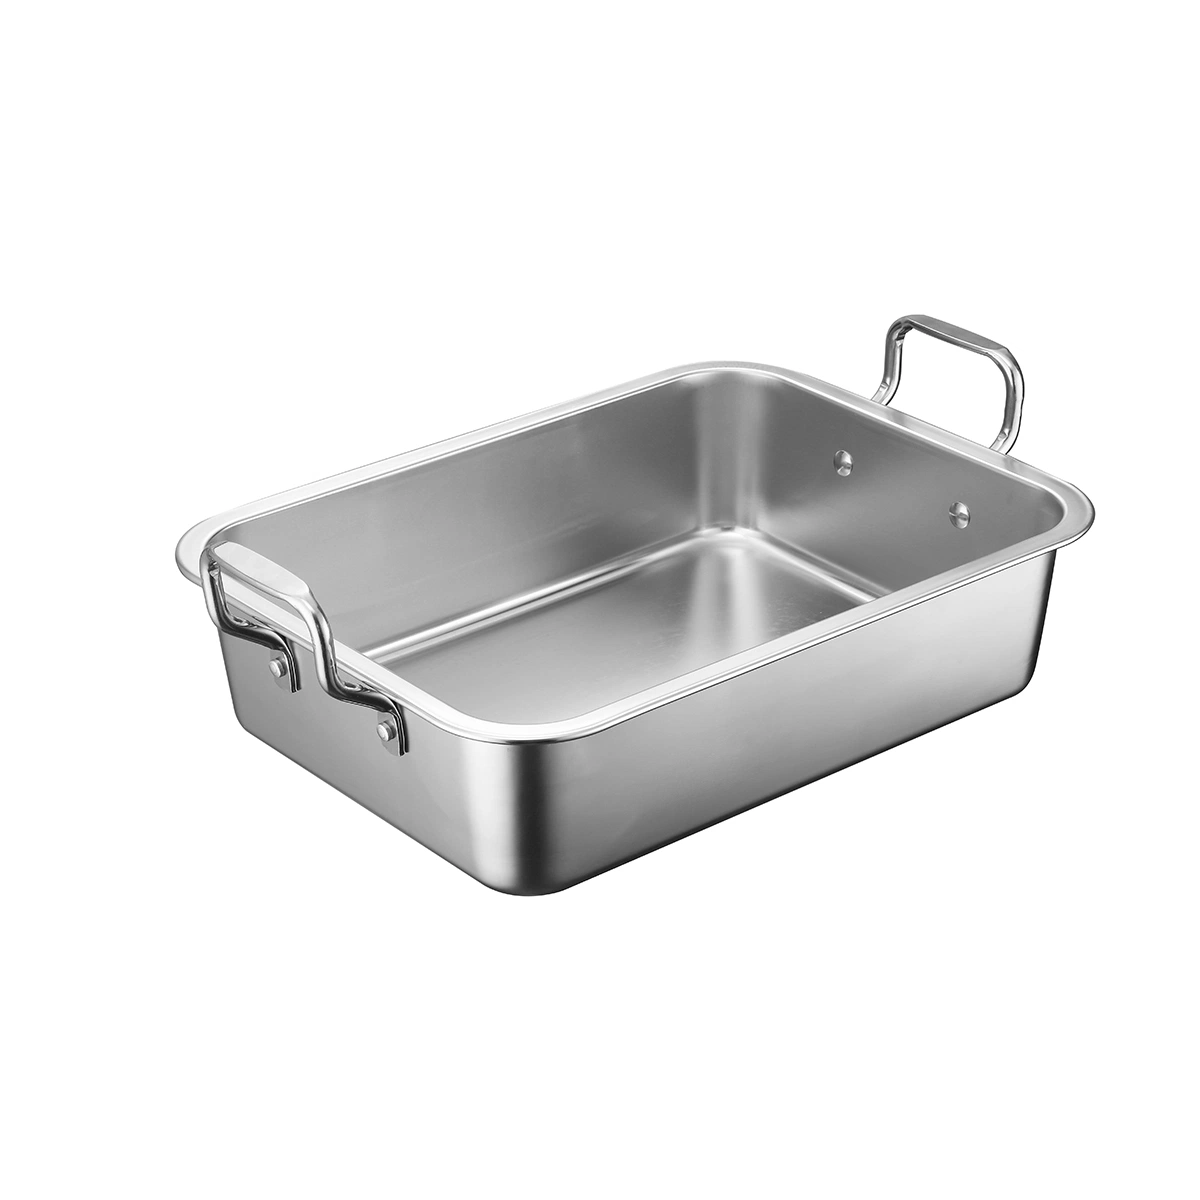 High Quality Stainless Steel Kitchen BBQ Grill Roasting Pan